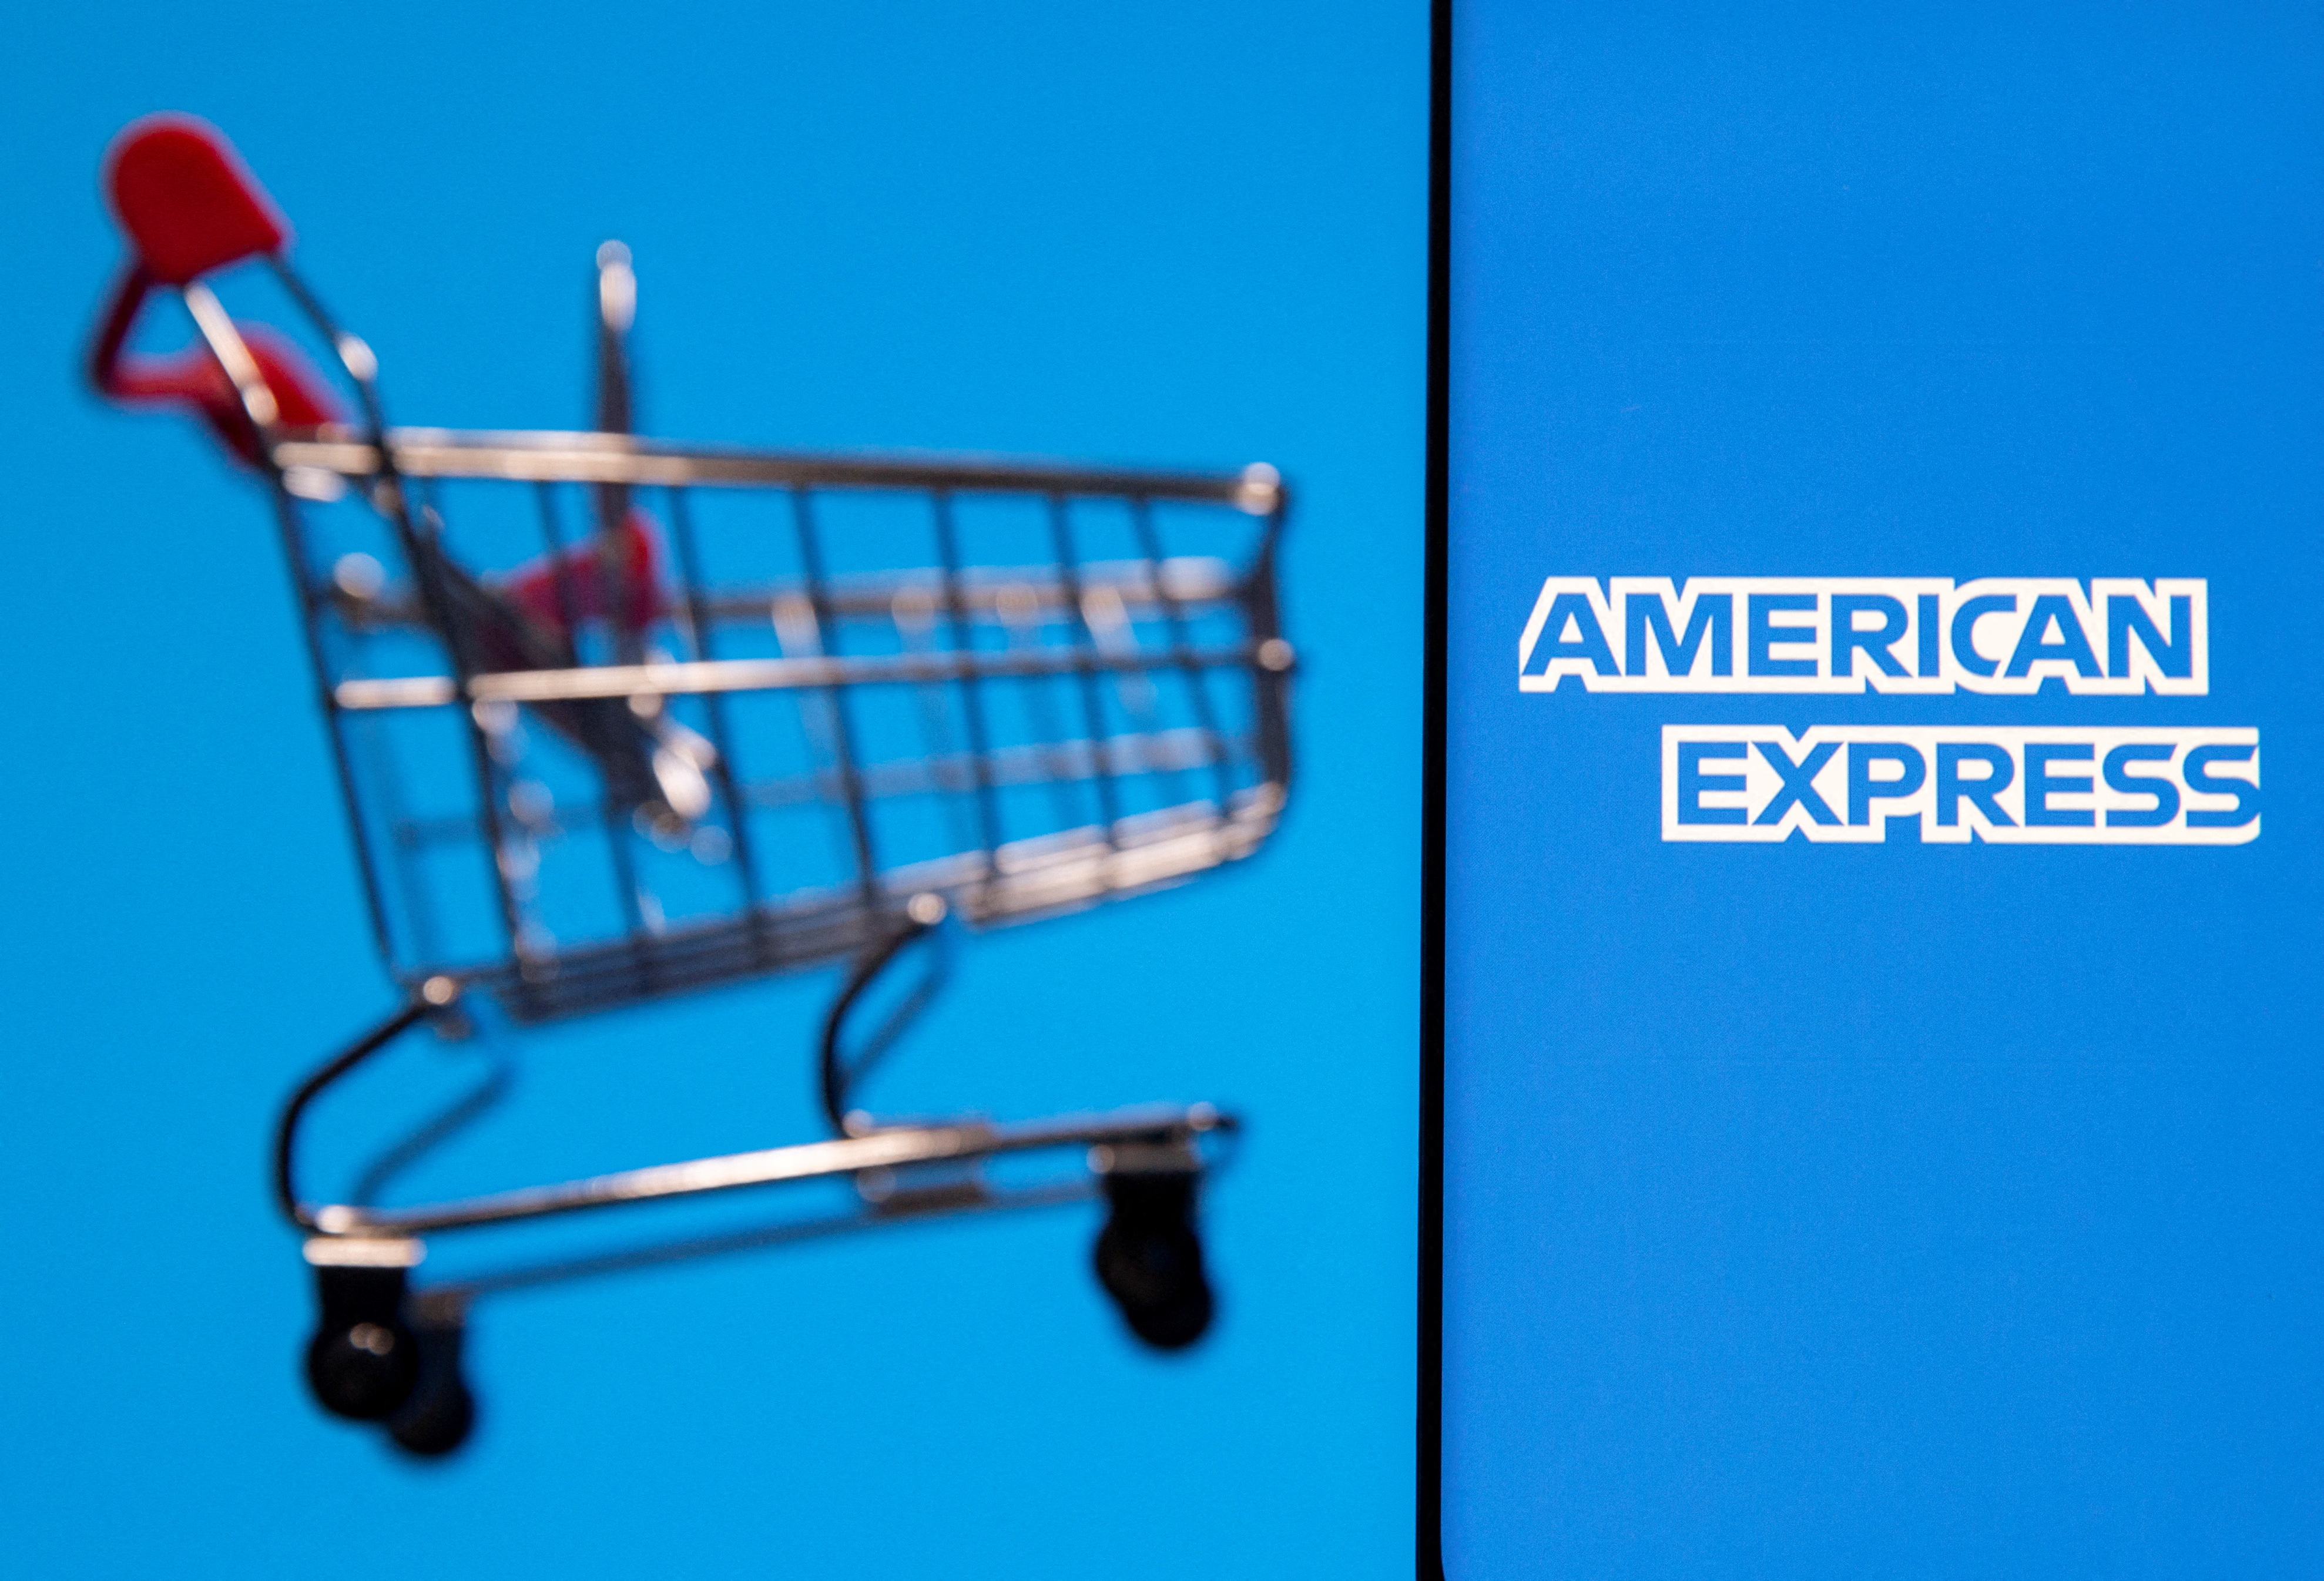 A smartphone with the American Express logo is placed near a toy shopping cart in this illustration